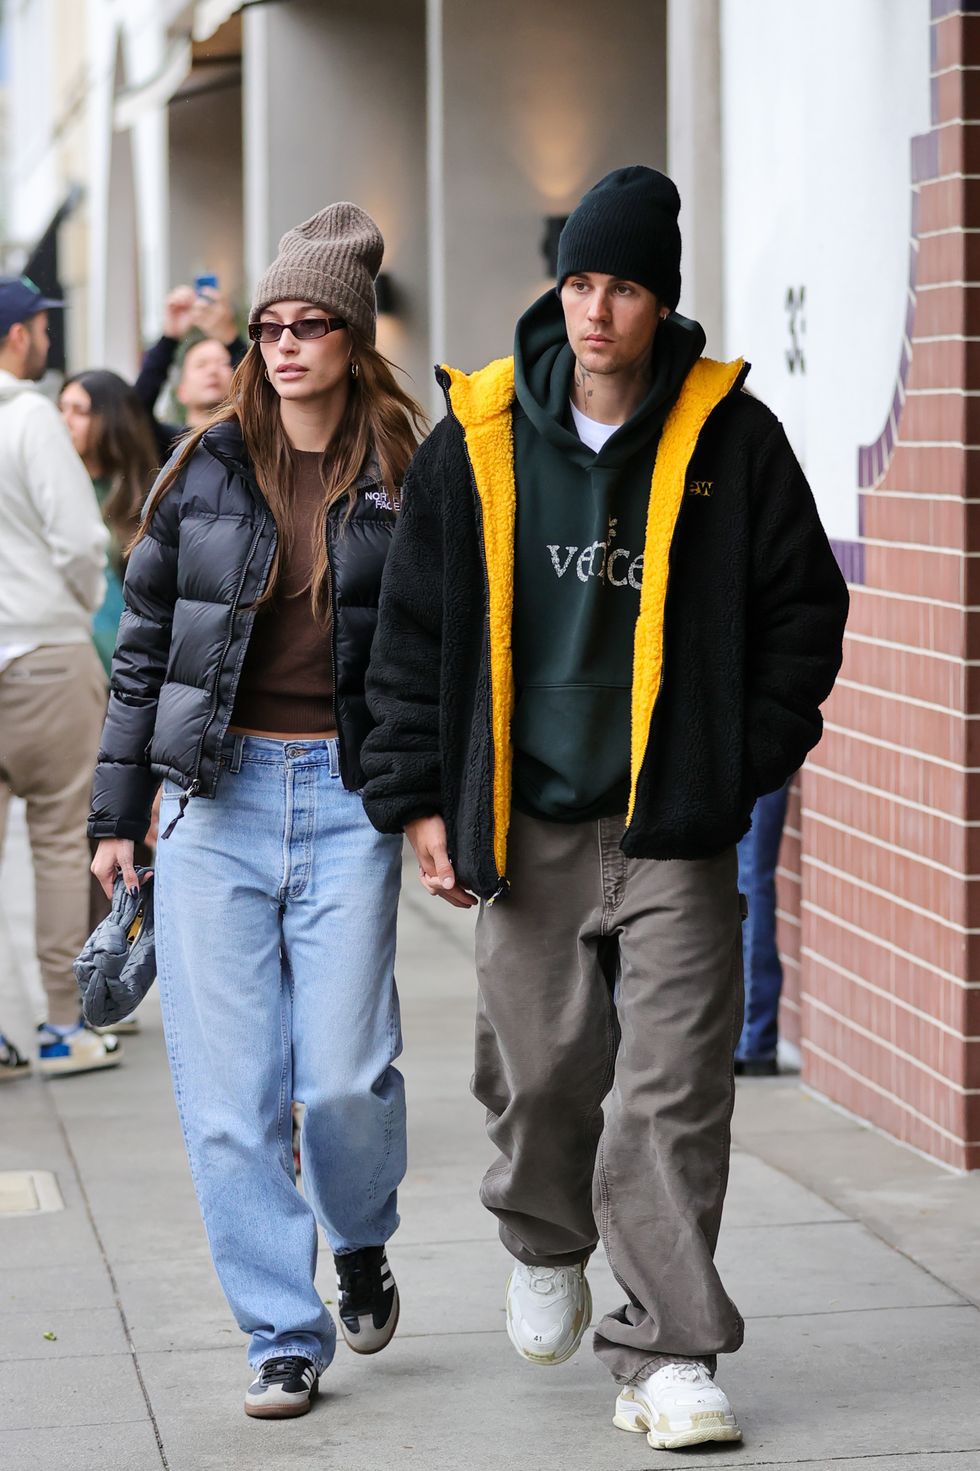 los angeles, ca november 07 hailey bieber and justin bieber are seen on november 07, 2022 in los angeles, california photo by rachpootbauer griffingc images